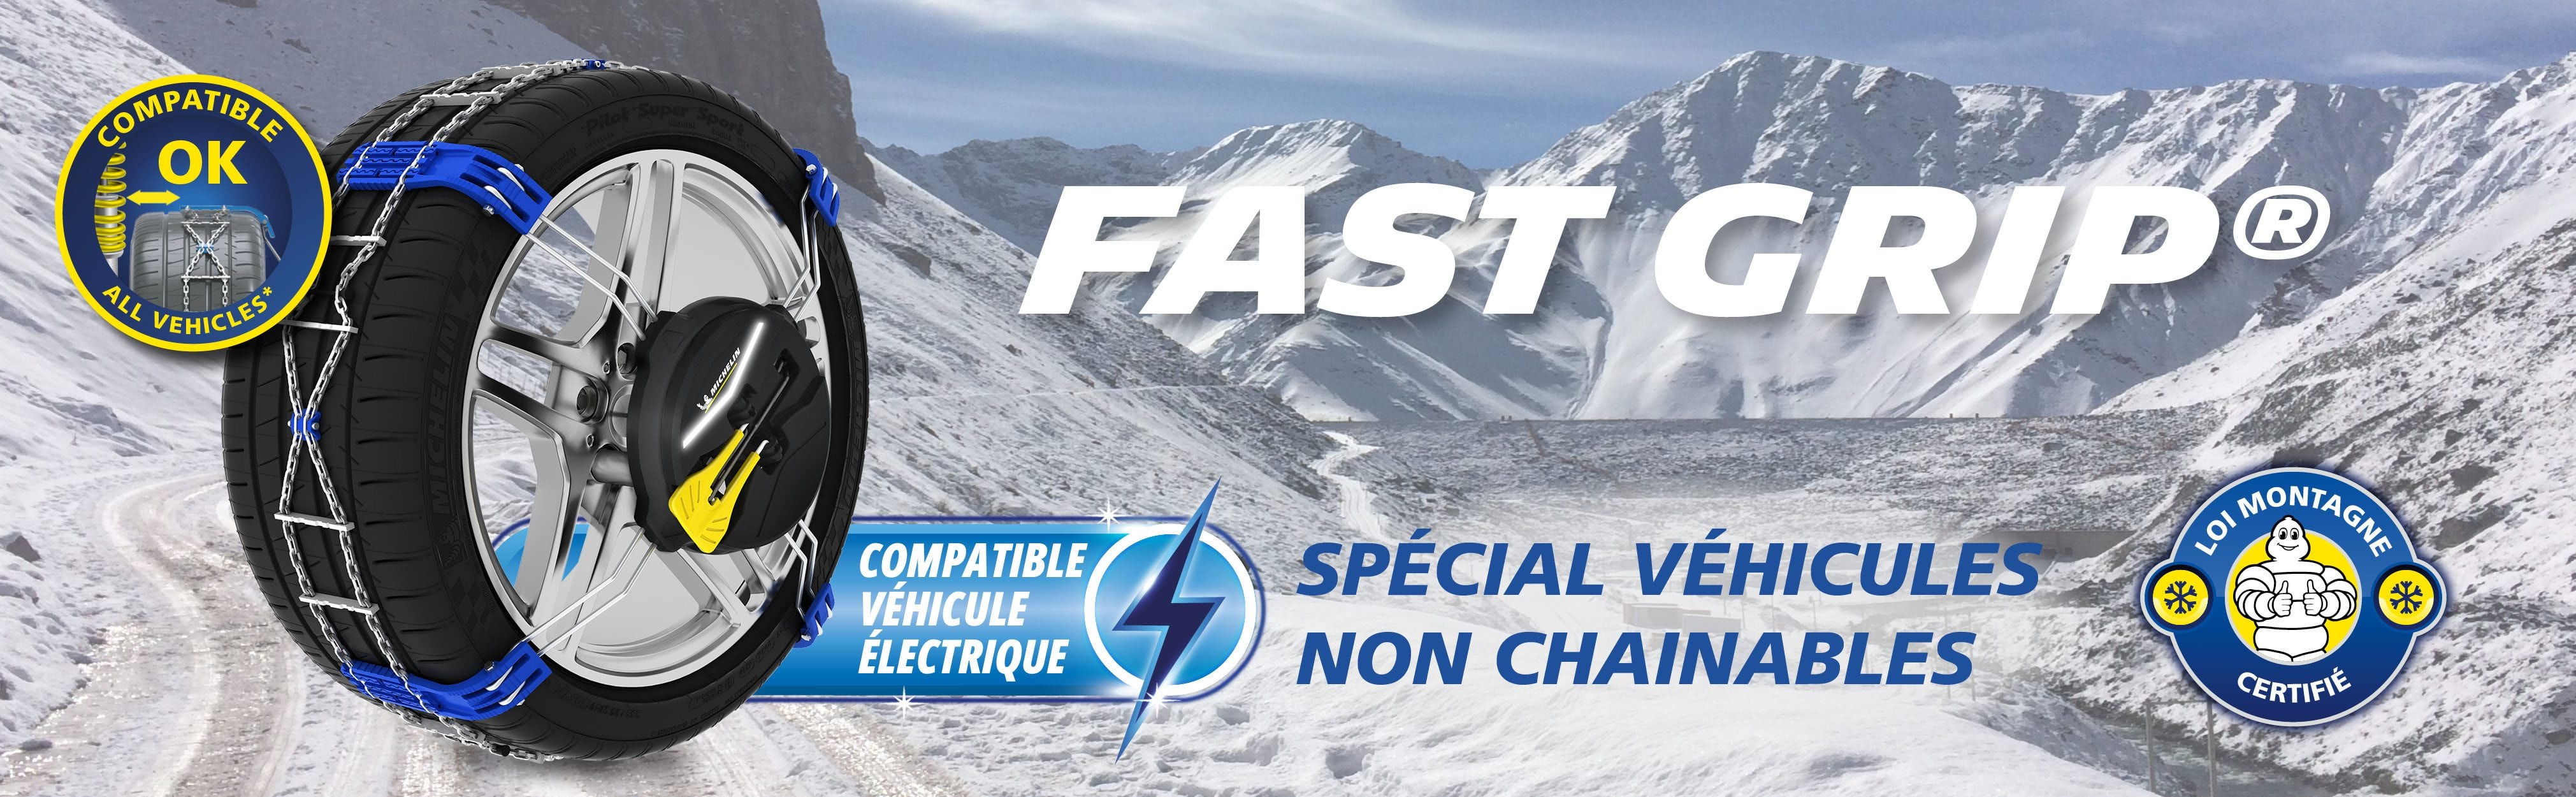 Chaines neige Fast Grip michelin montage frontal automatique 235/60R18  255/50R19 255/55R18 285/40R20 